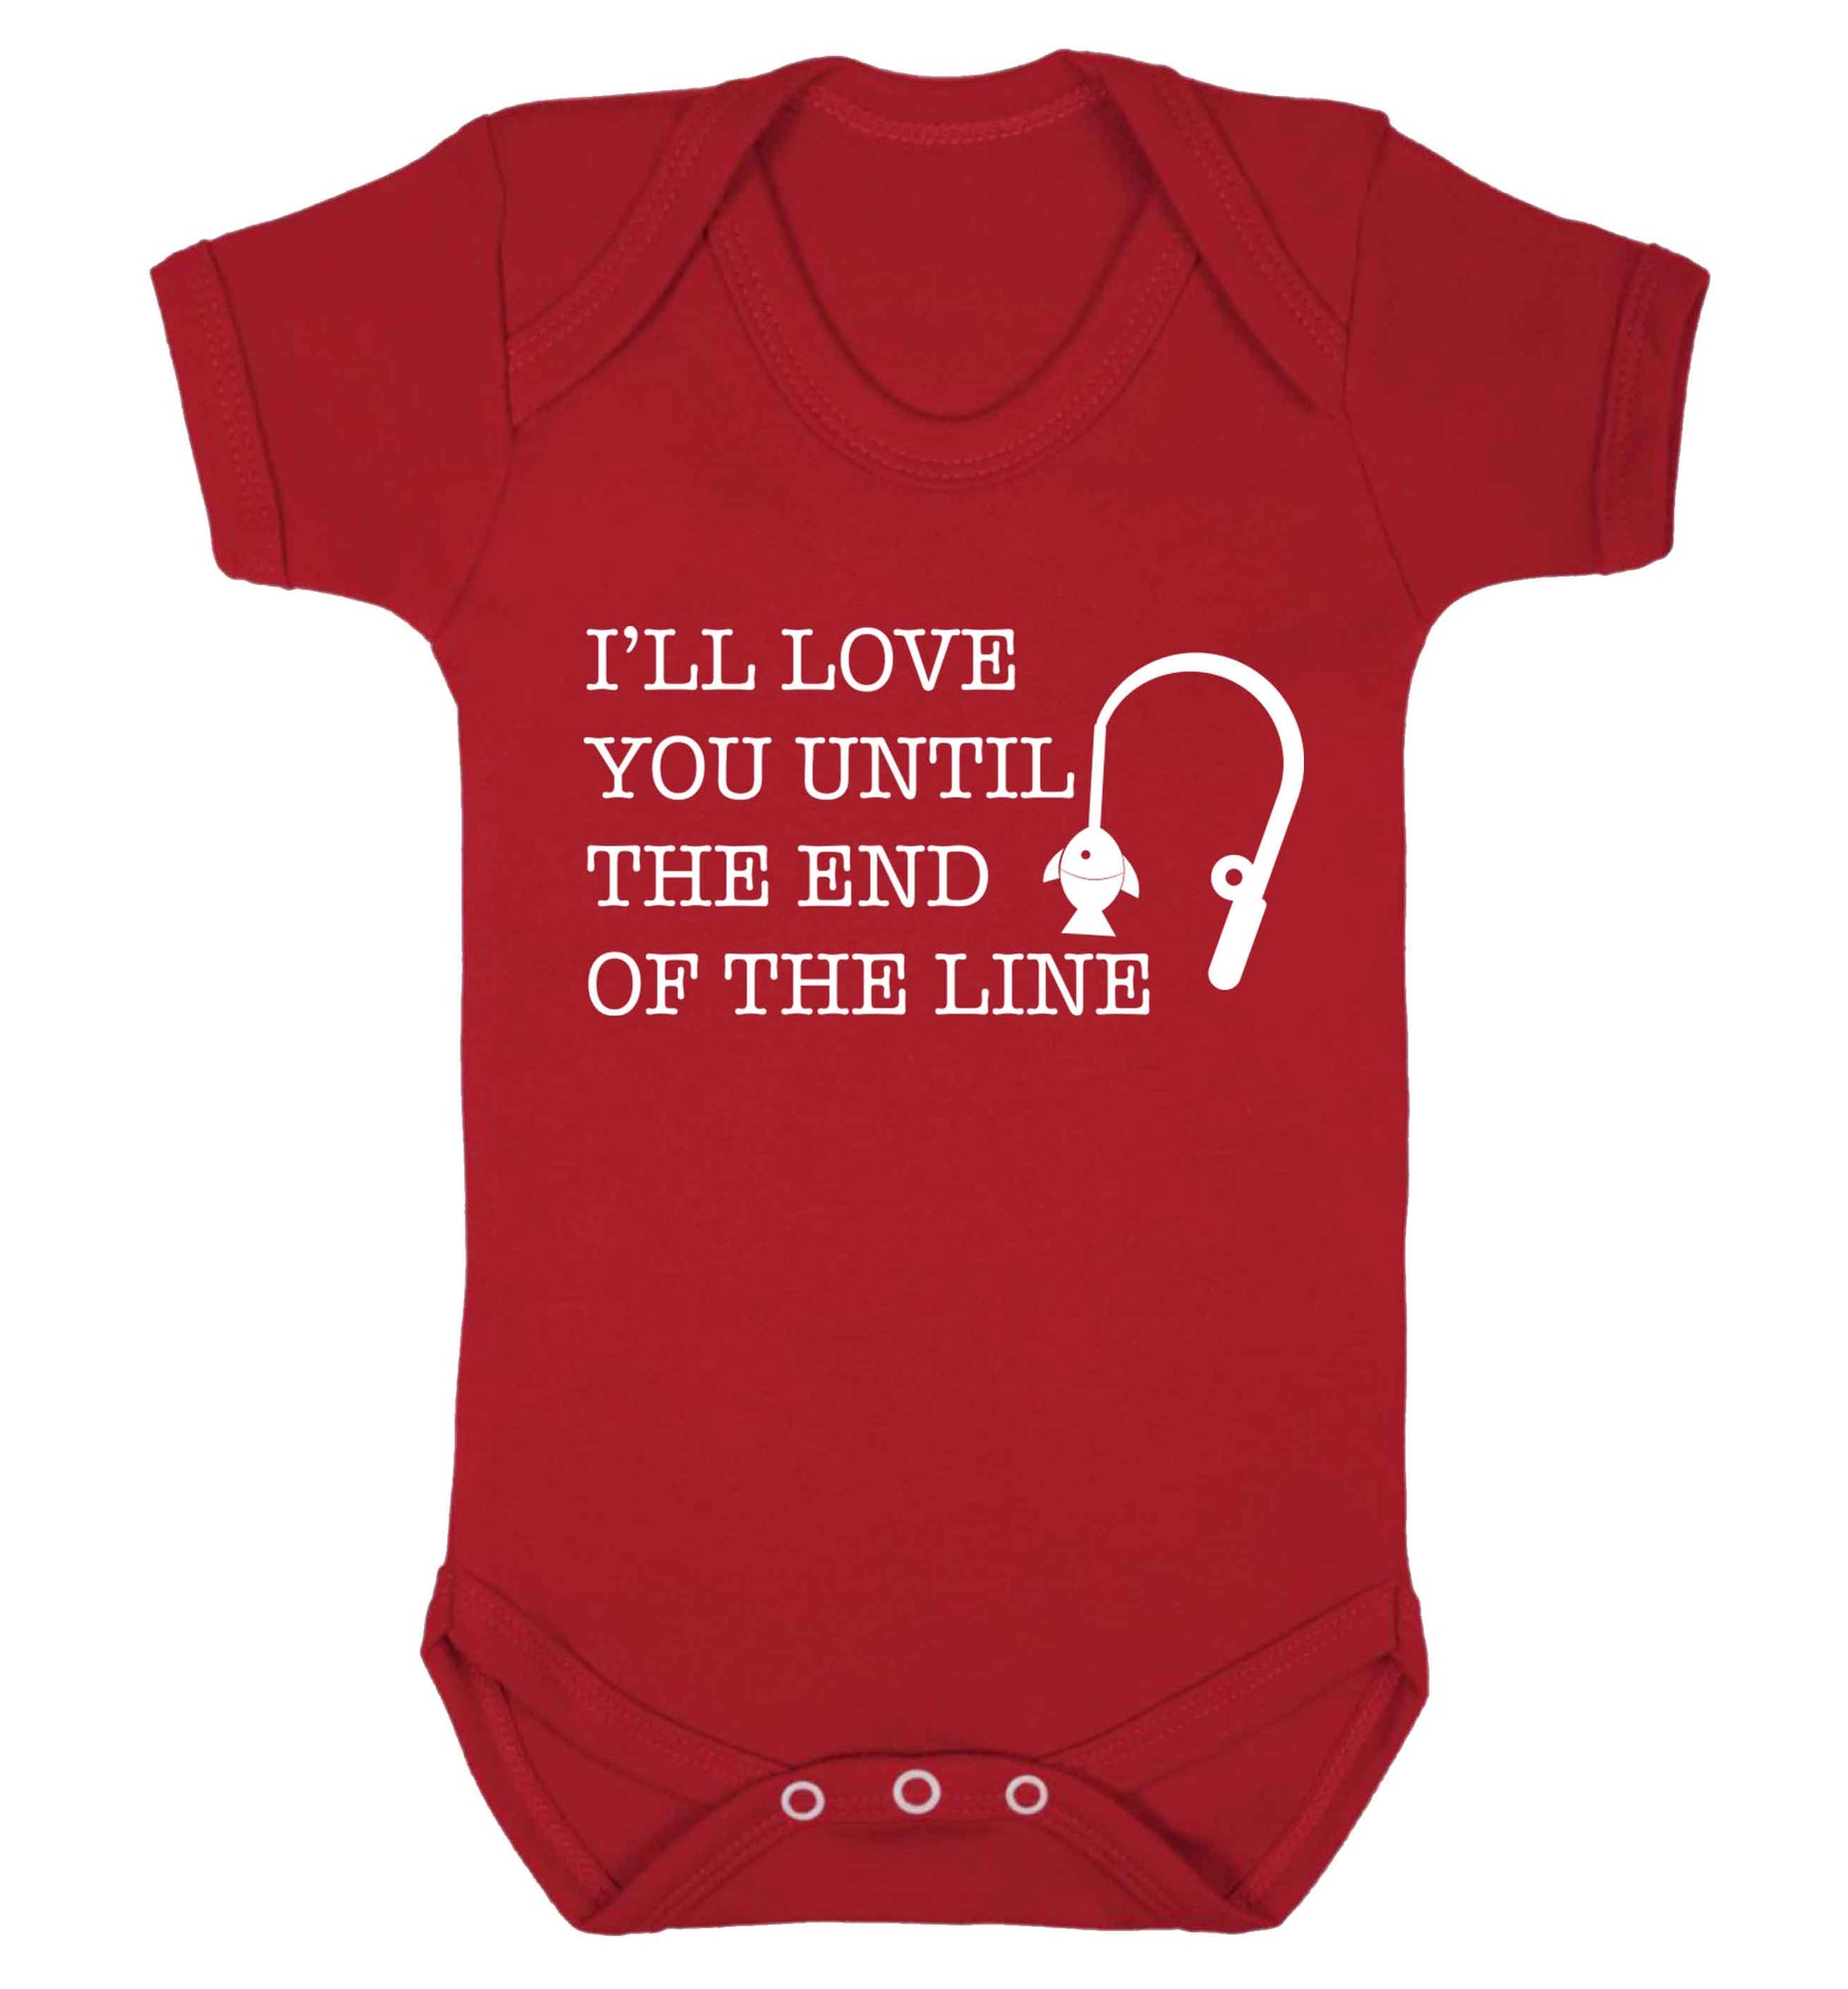 I'll love you until the end of the line Baby Vest red 18-24 months